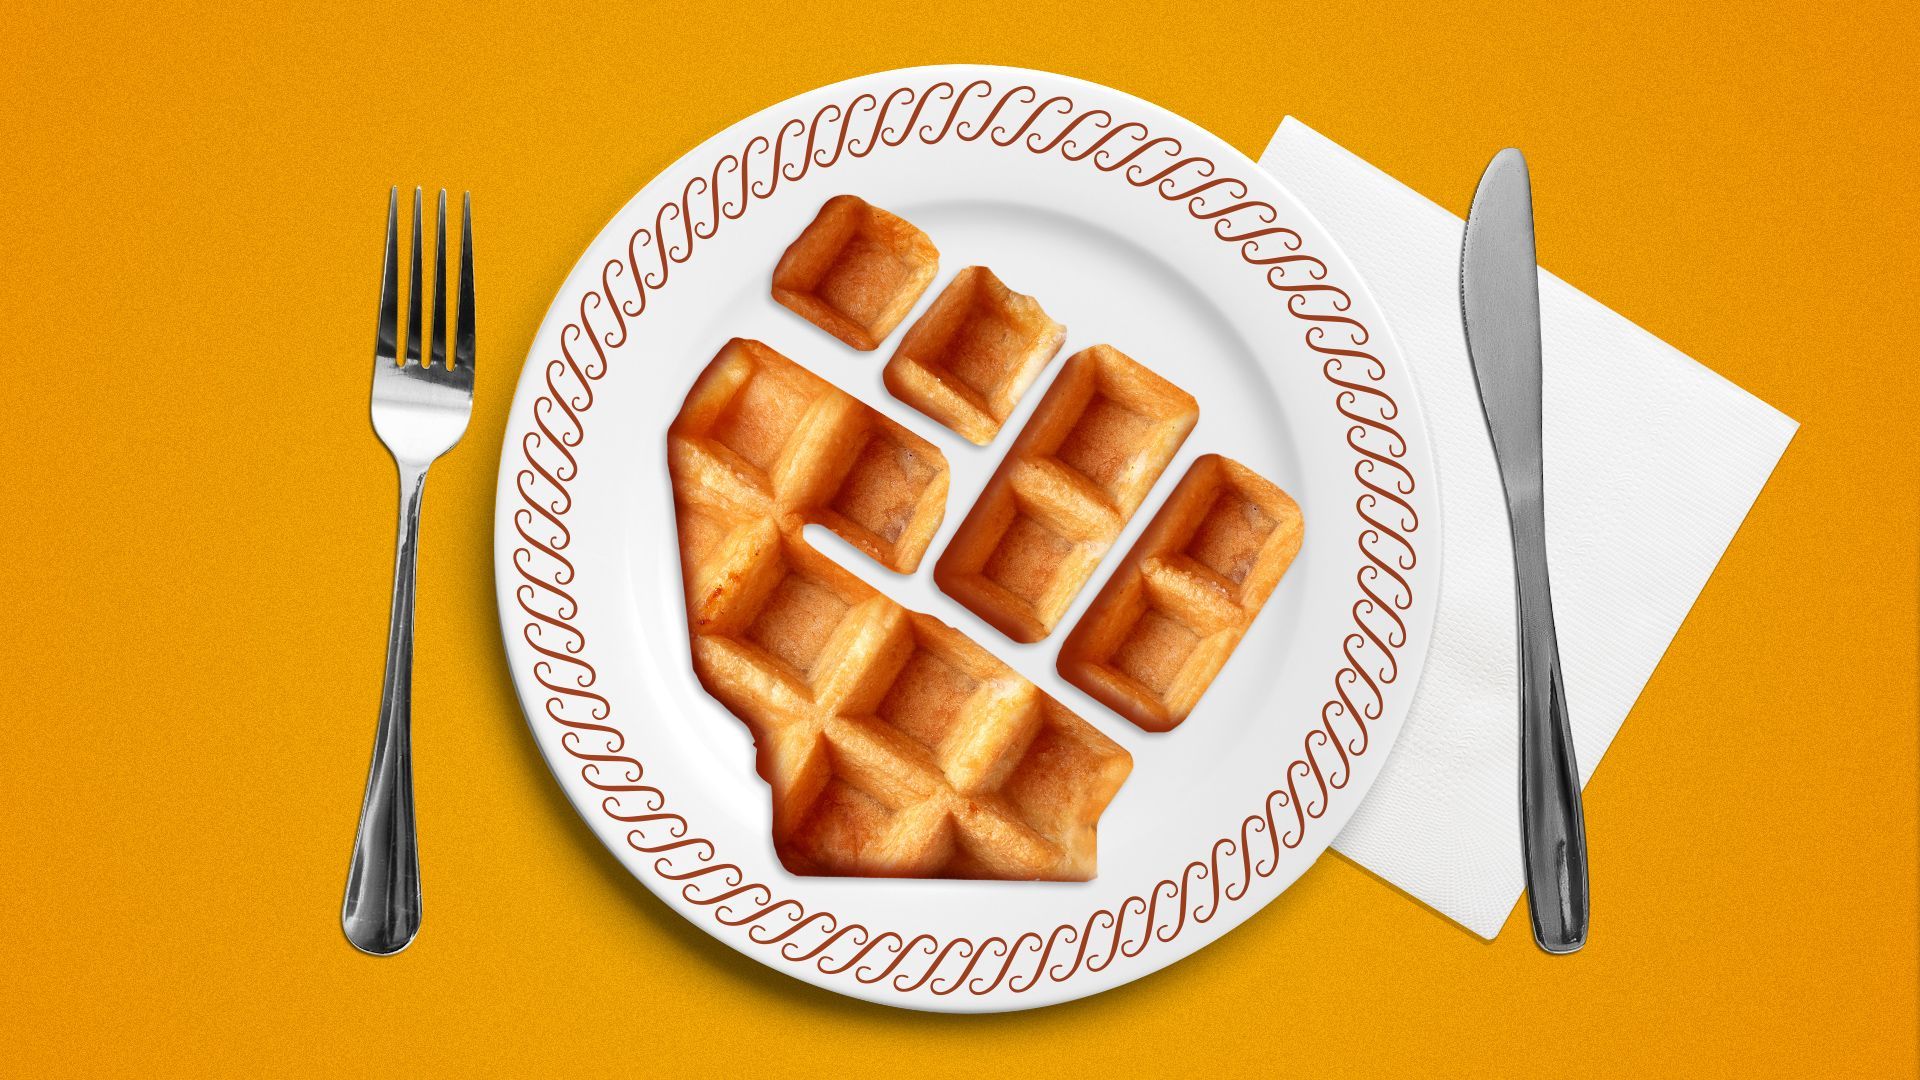 Illustration of a Waffle House plate with a waffle in the shape of a fist. 